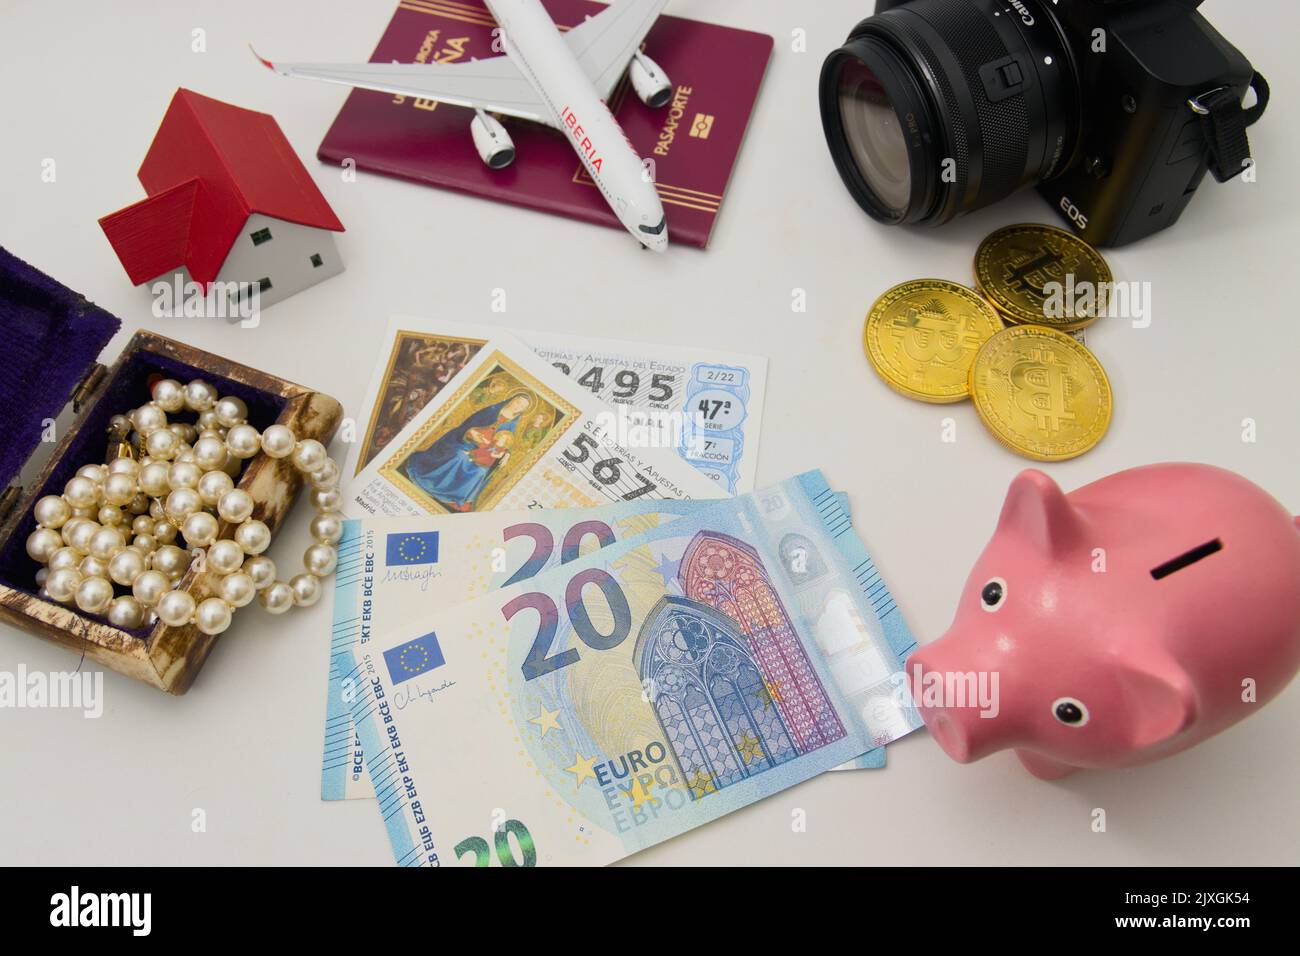 2022. Spain. Flat lay of a table with the options that exist after becoming a millionaire money, jewelry, travel, real estate investments, luxury, tec Stock Photo